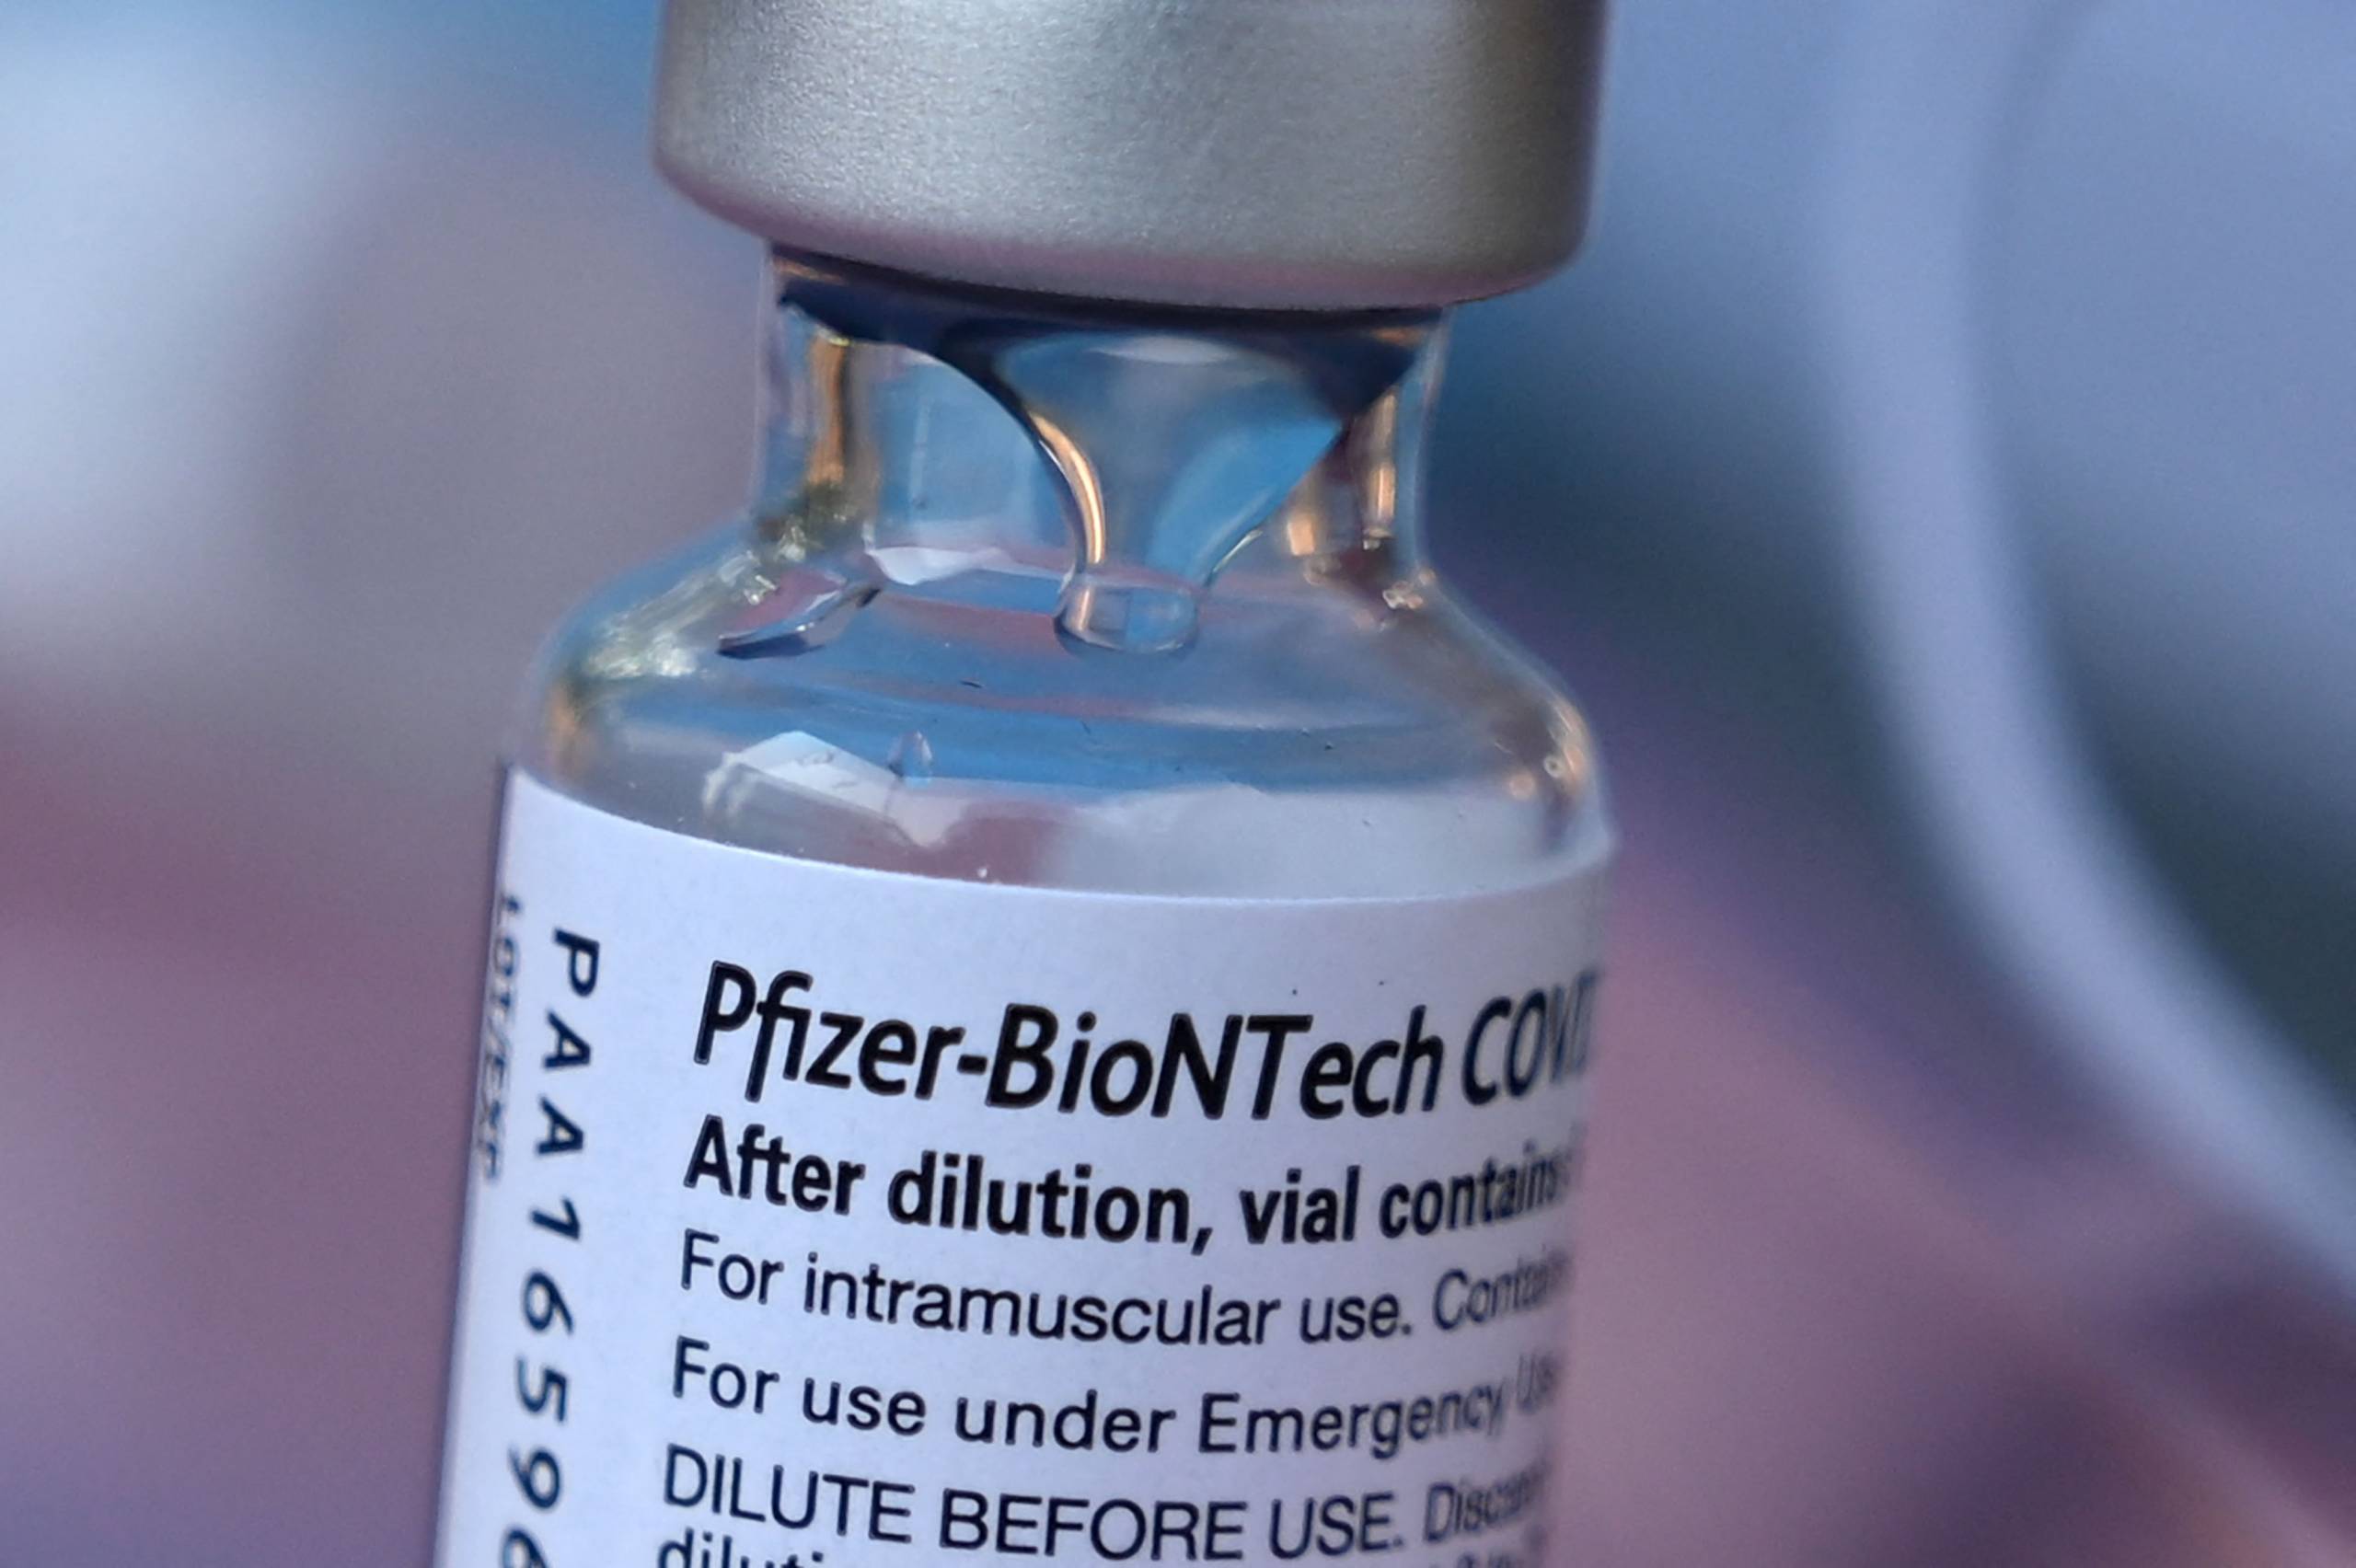 A close-up of the label on a small glass vial, with a silver-colored cap, of the Pfizer-BioNTech vaccine.